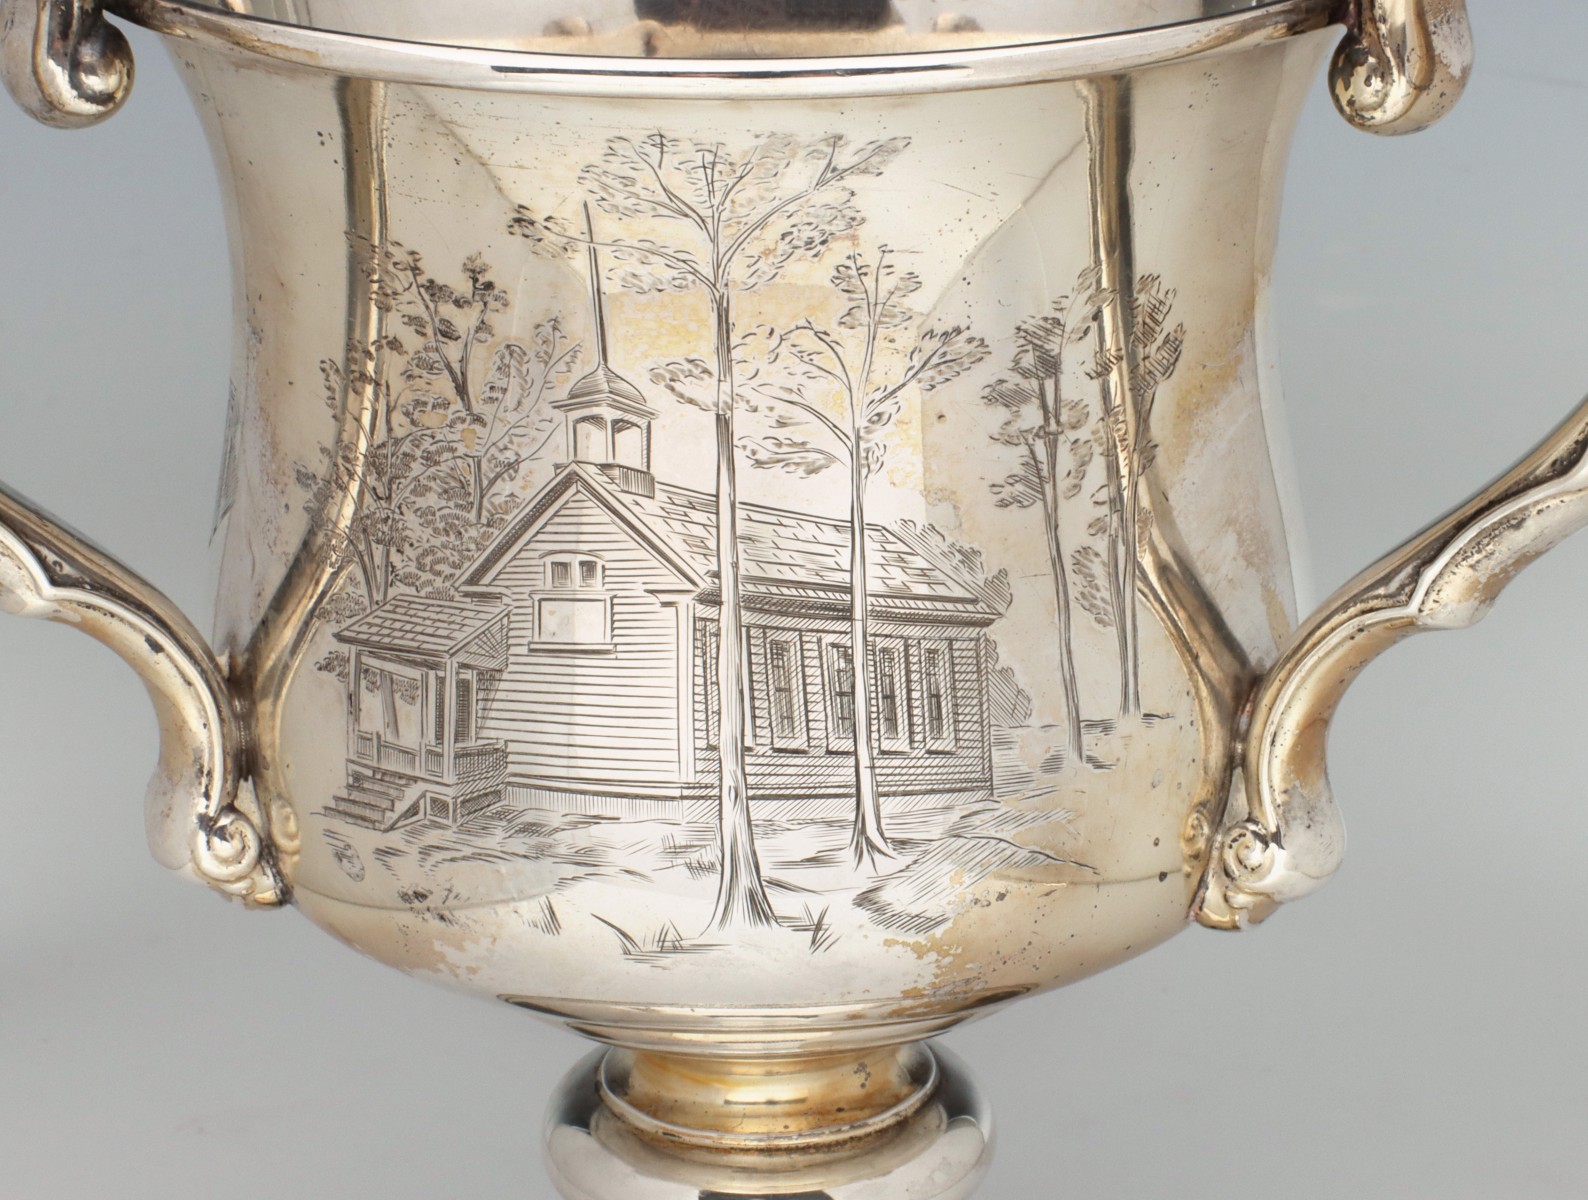 A WOODSIDE STERLING LOVING CUP WITH DETAILED ENGRAVINGS